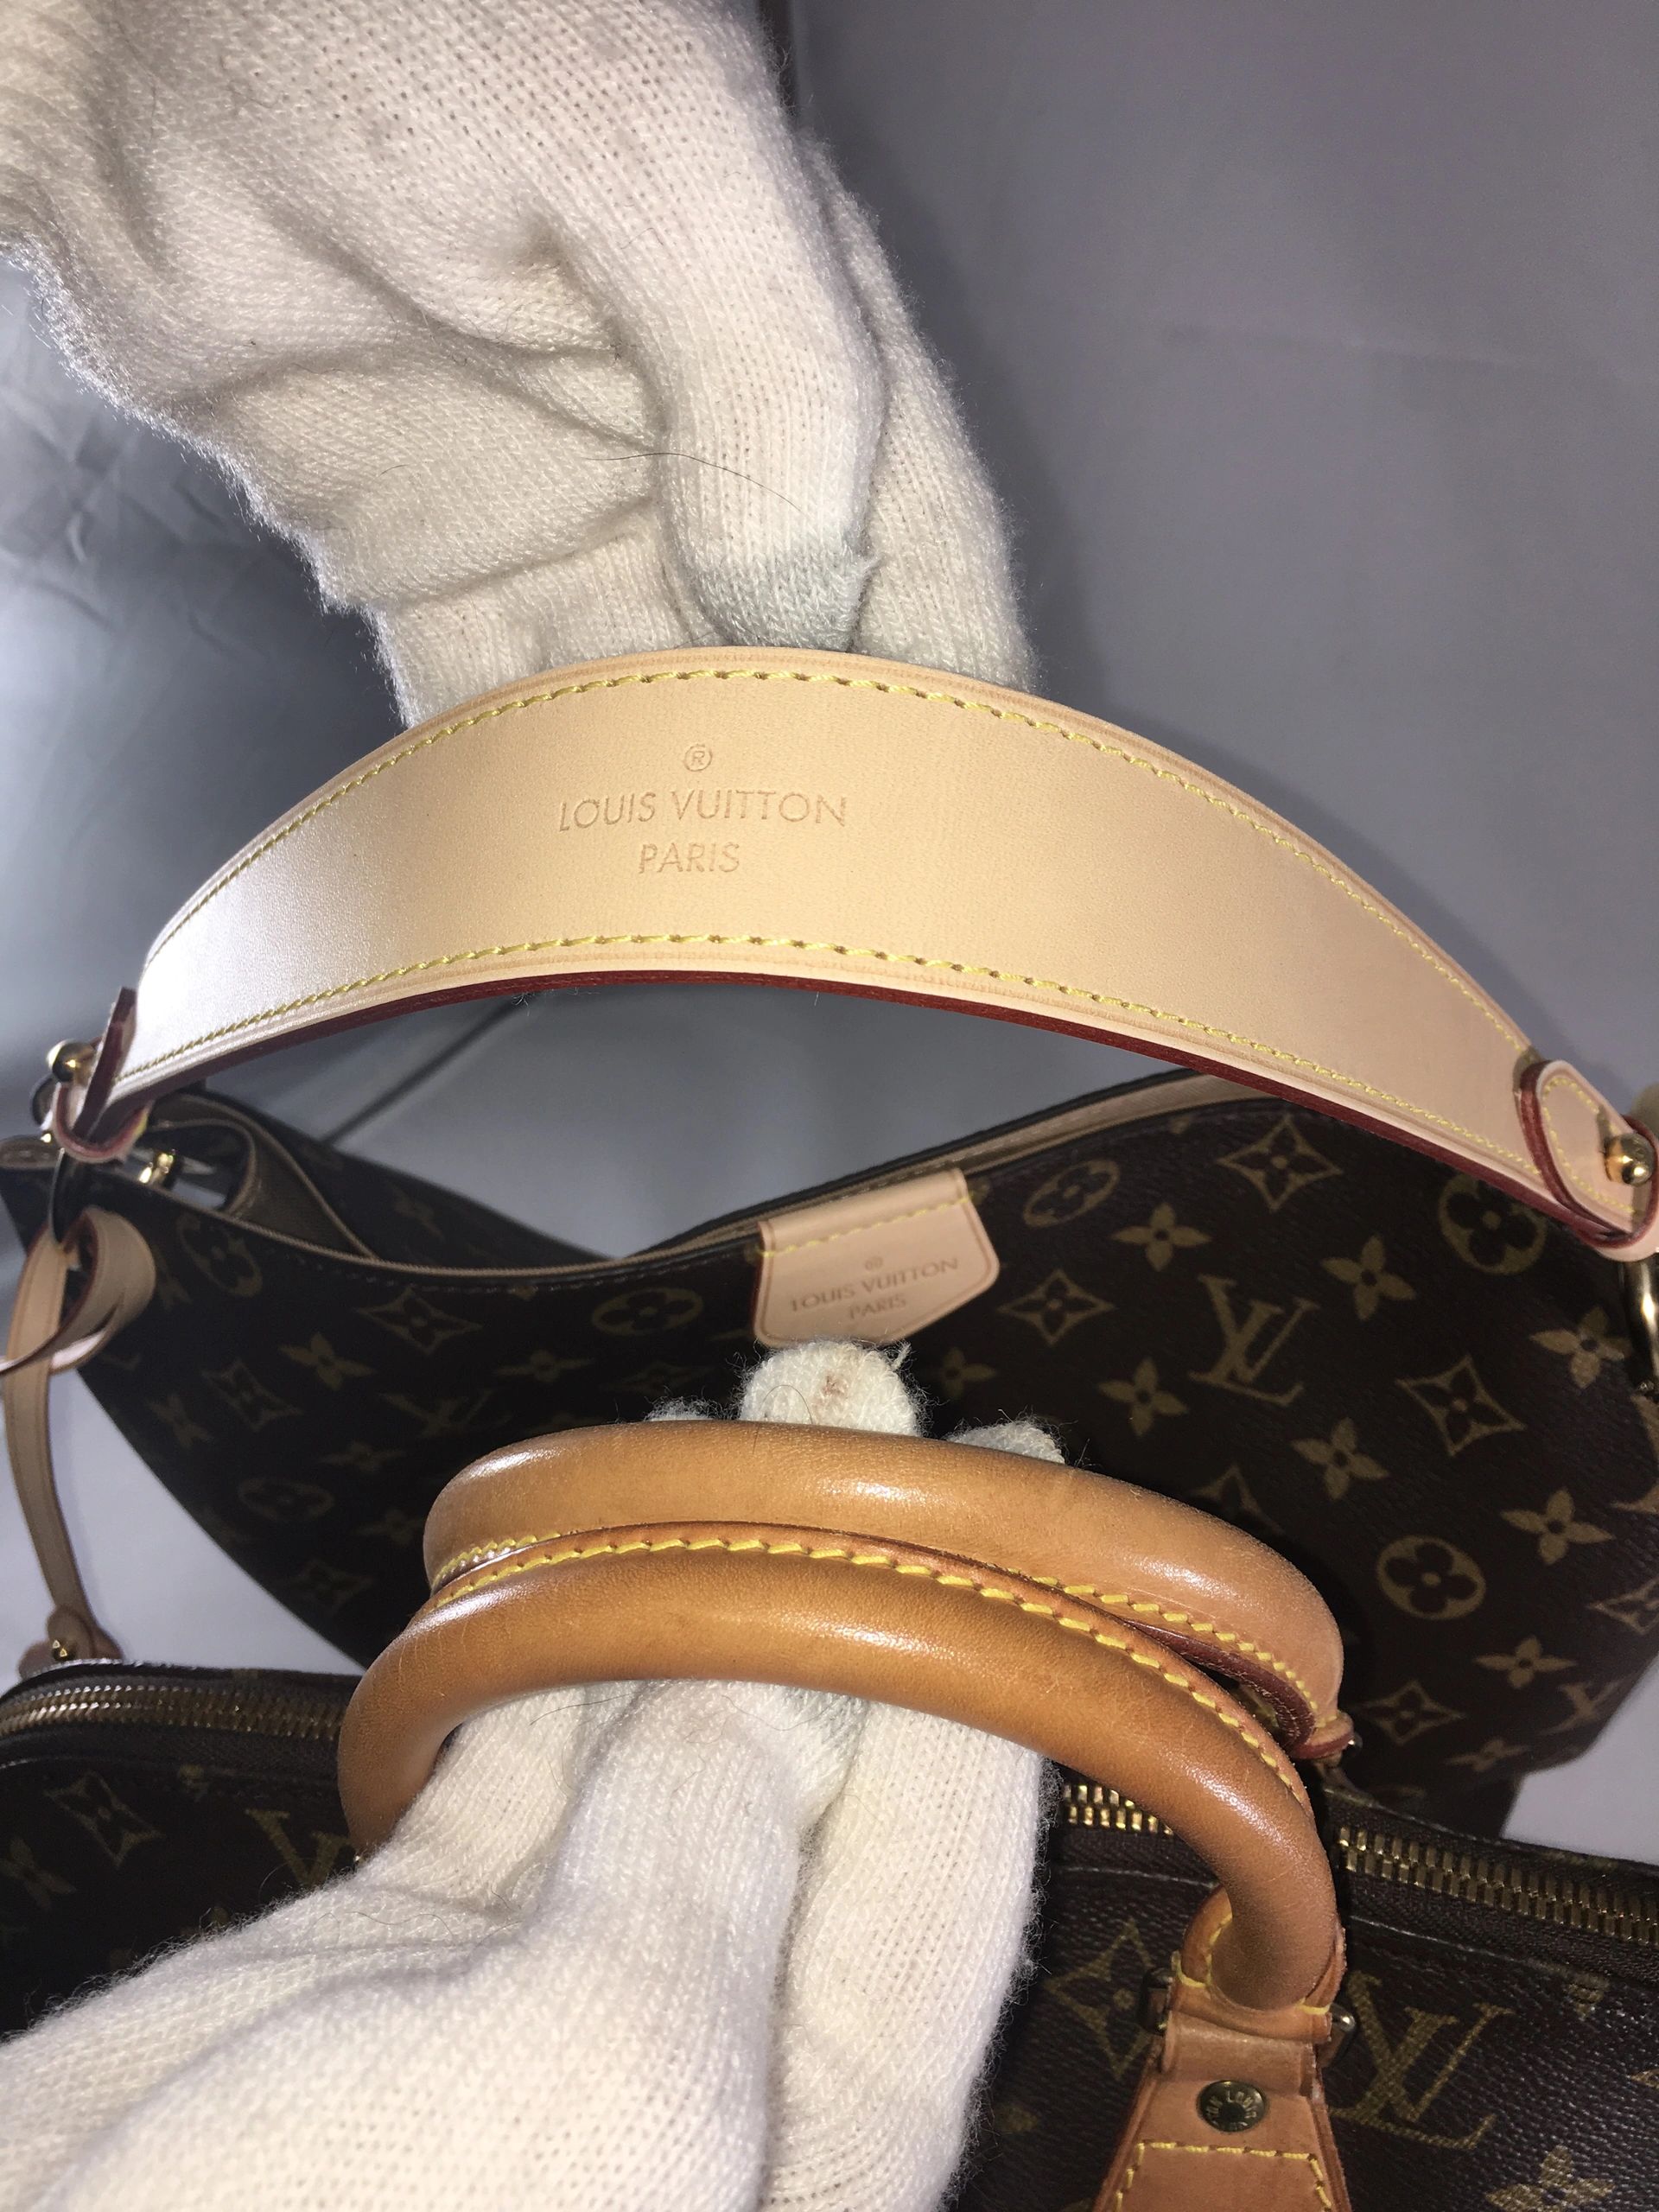 patina lv leather